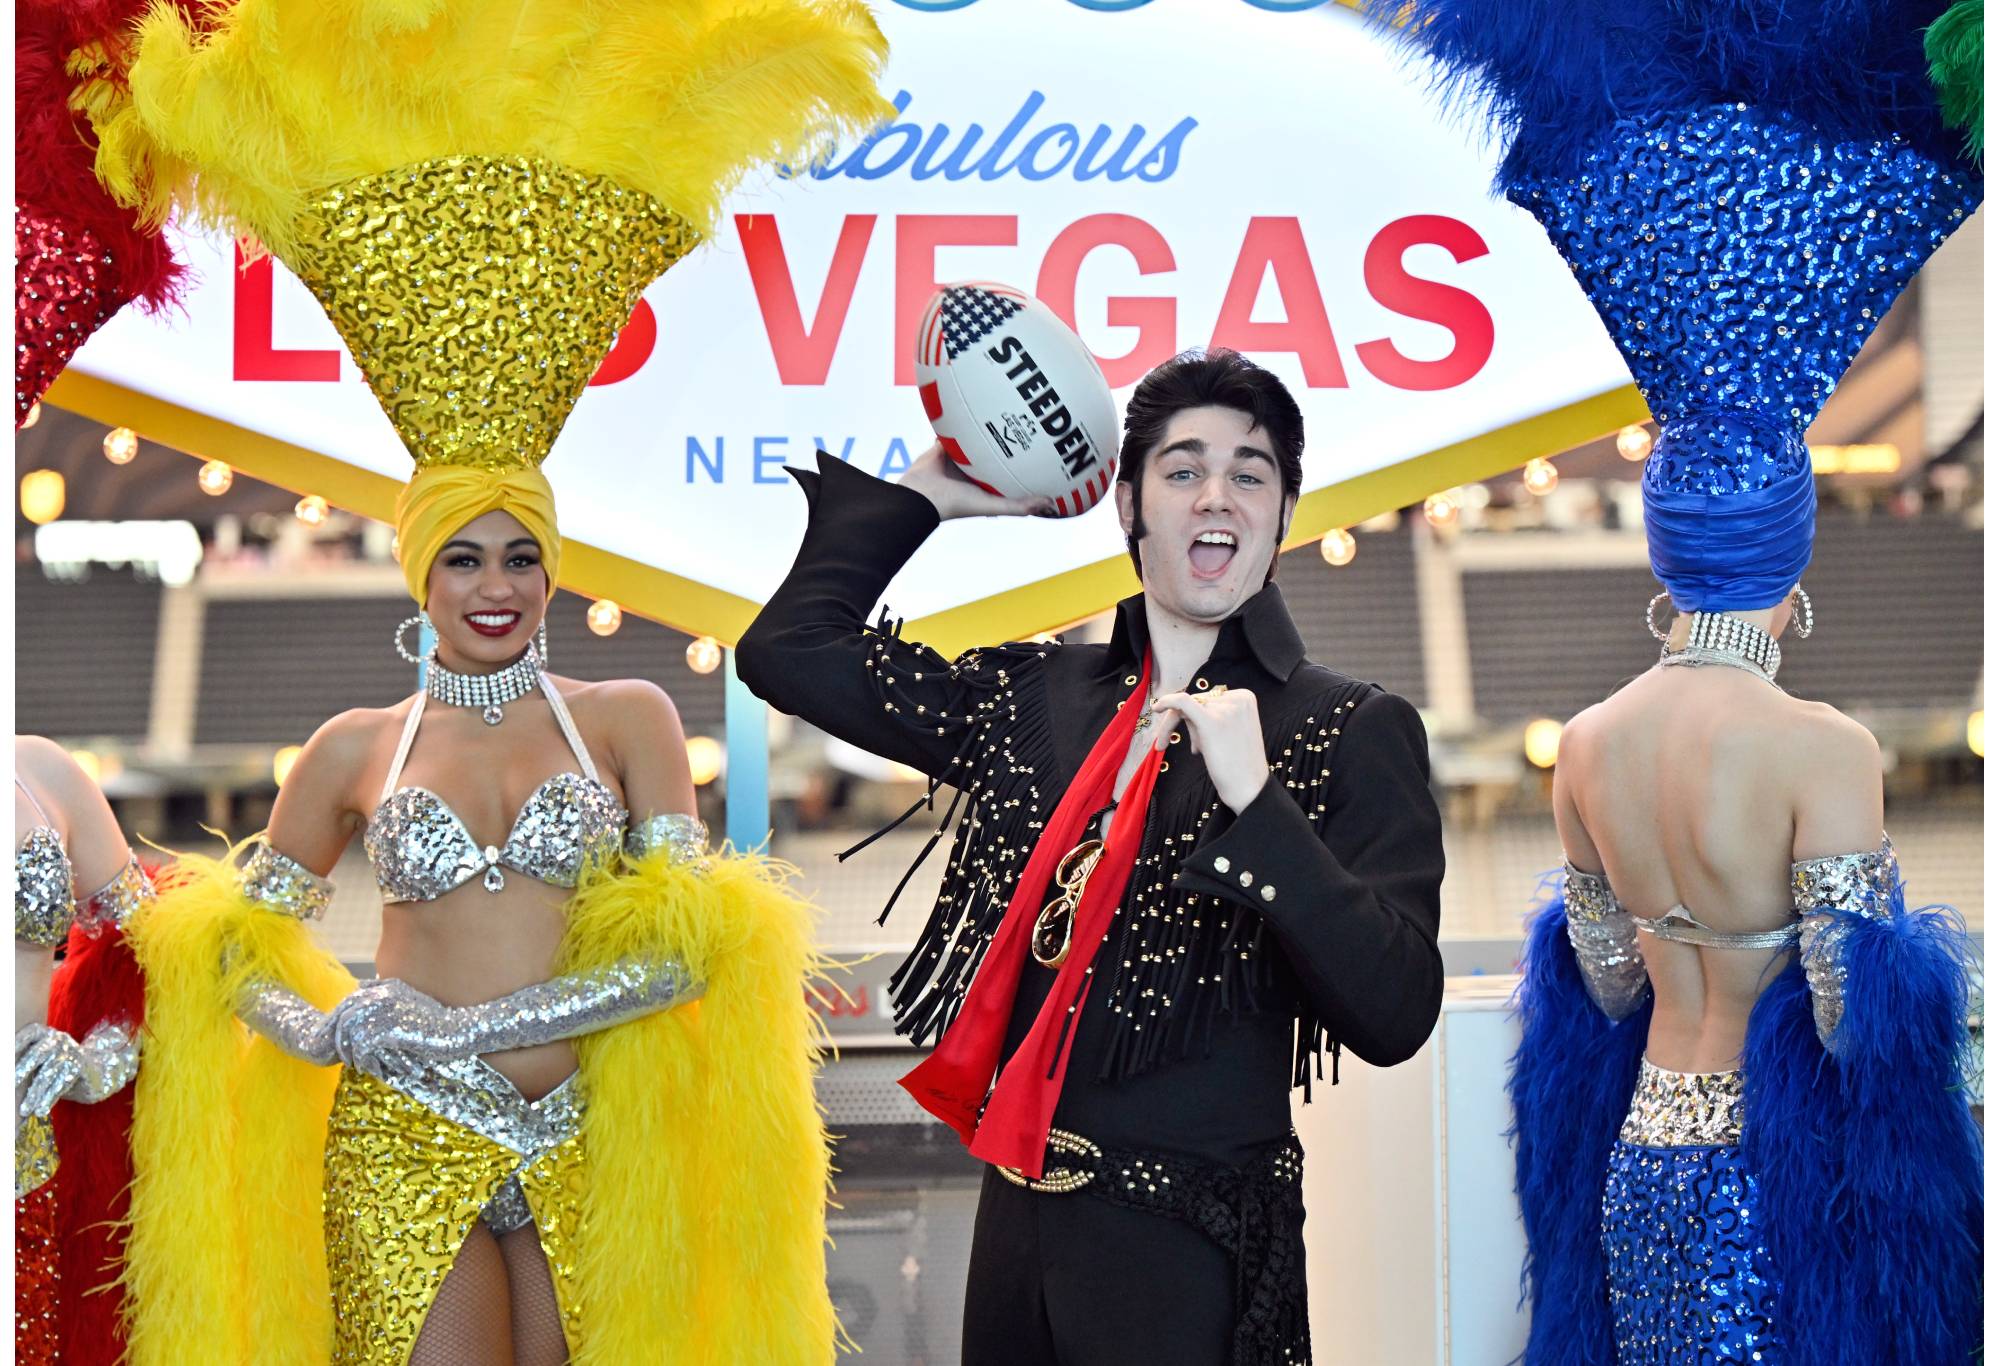 An Elvis impersonator wields a Steeden with Las Vegas showgirls. (Photo by David Becker/Getty Images for NRL)